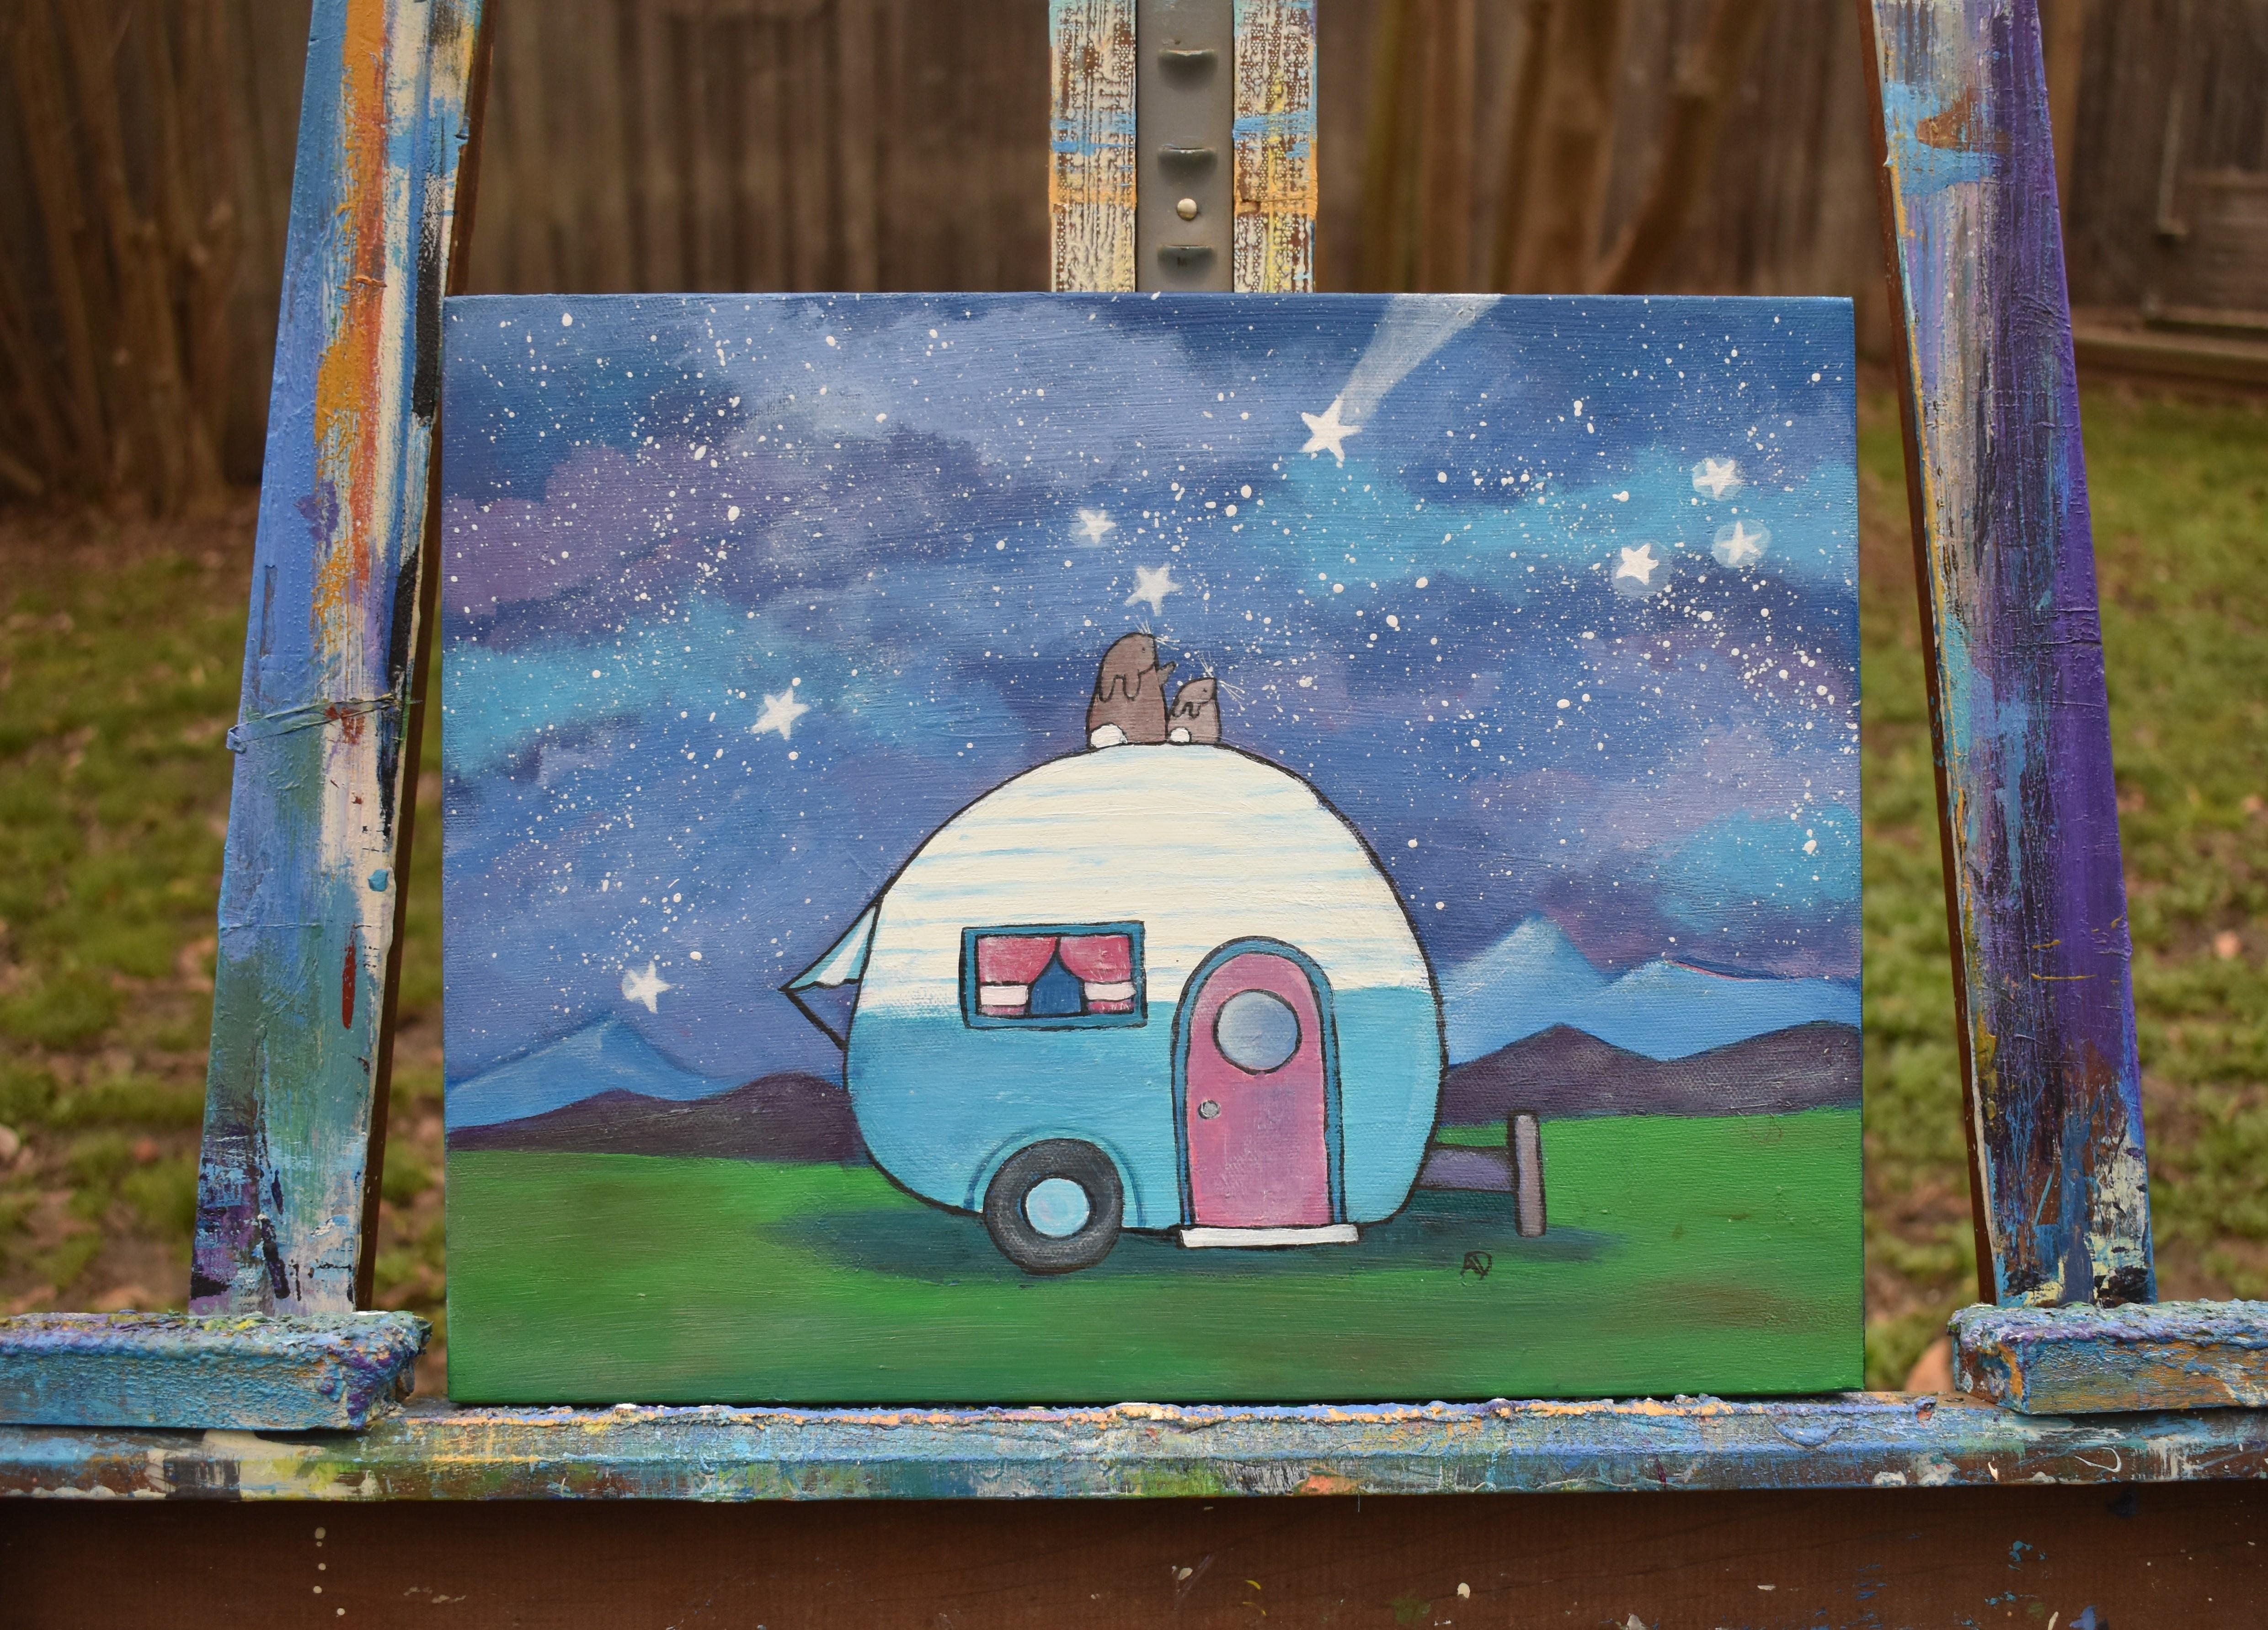 <p>Artist Comments<br>Two little bunnies sit watching the sky, counting star wishes, and discussing dreams in artist Andrea Doss's whimsical piece. They find solace in the middle of nowhere, where everything is lit up with stars. The charming